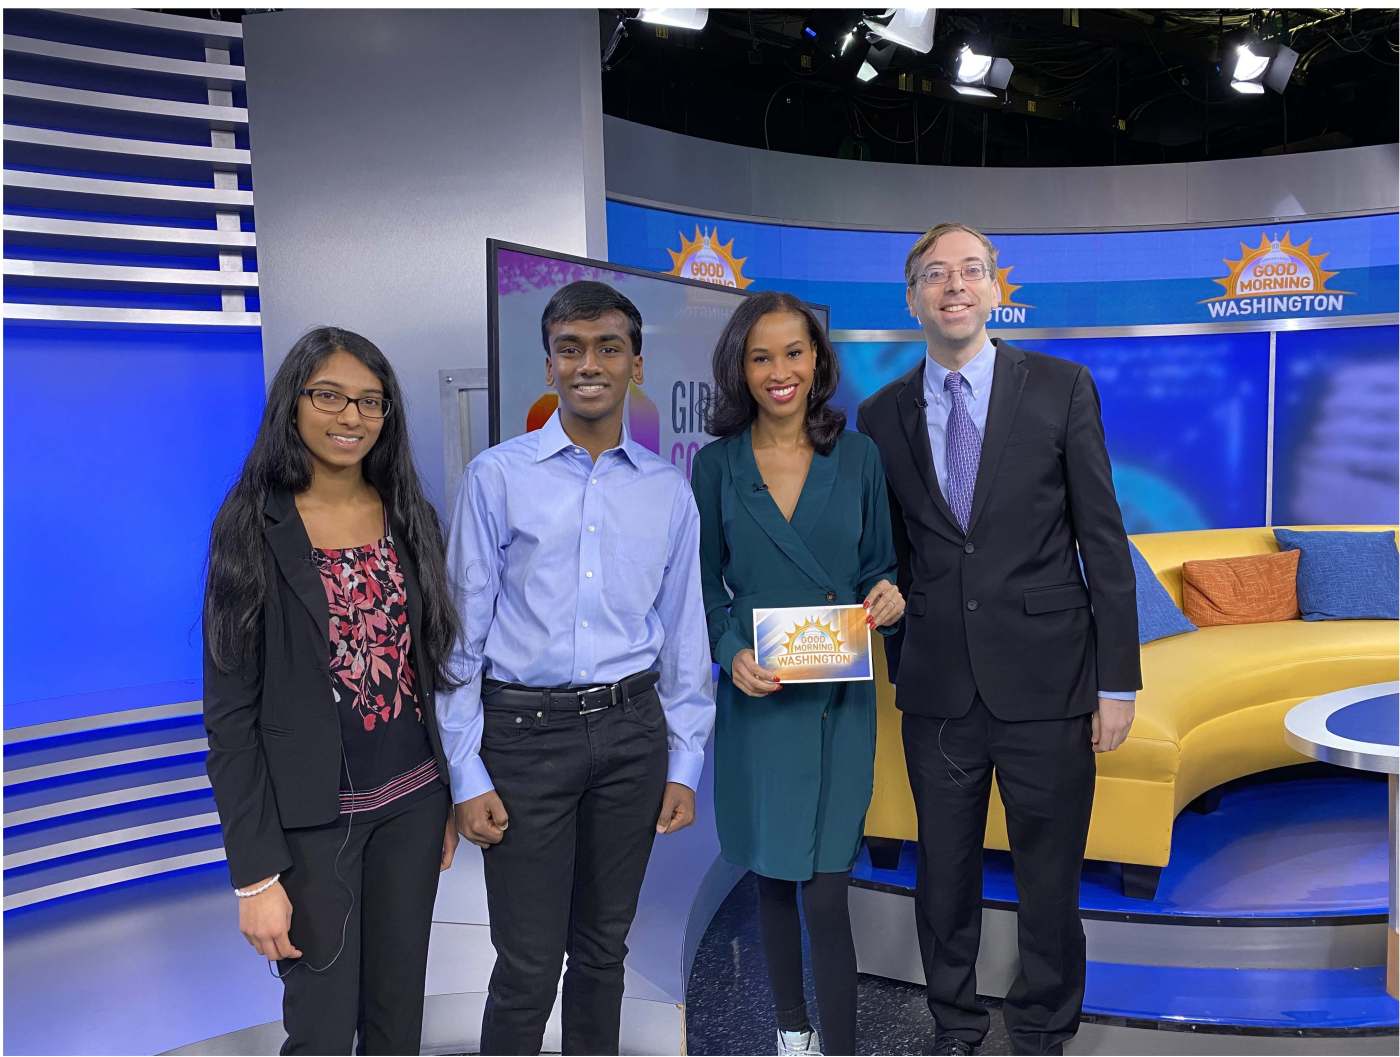 Members of the Girls Computing League and Dr. Gil Alterovitz discuss their participation in the 2019 AI Tech Sprint on Good Morning Washington. From left to right: Shreeja Kikkisetti, Neeyanth Kopparapu, Adrianna Hopkins, a reporter with ABC News 7, and Dr. Gil Alterovitz. (Photo was taken prior to COVID-19 pandemic.)